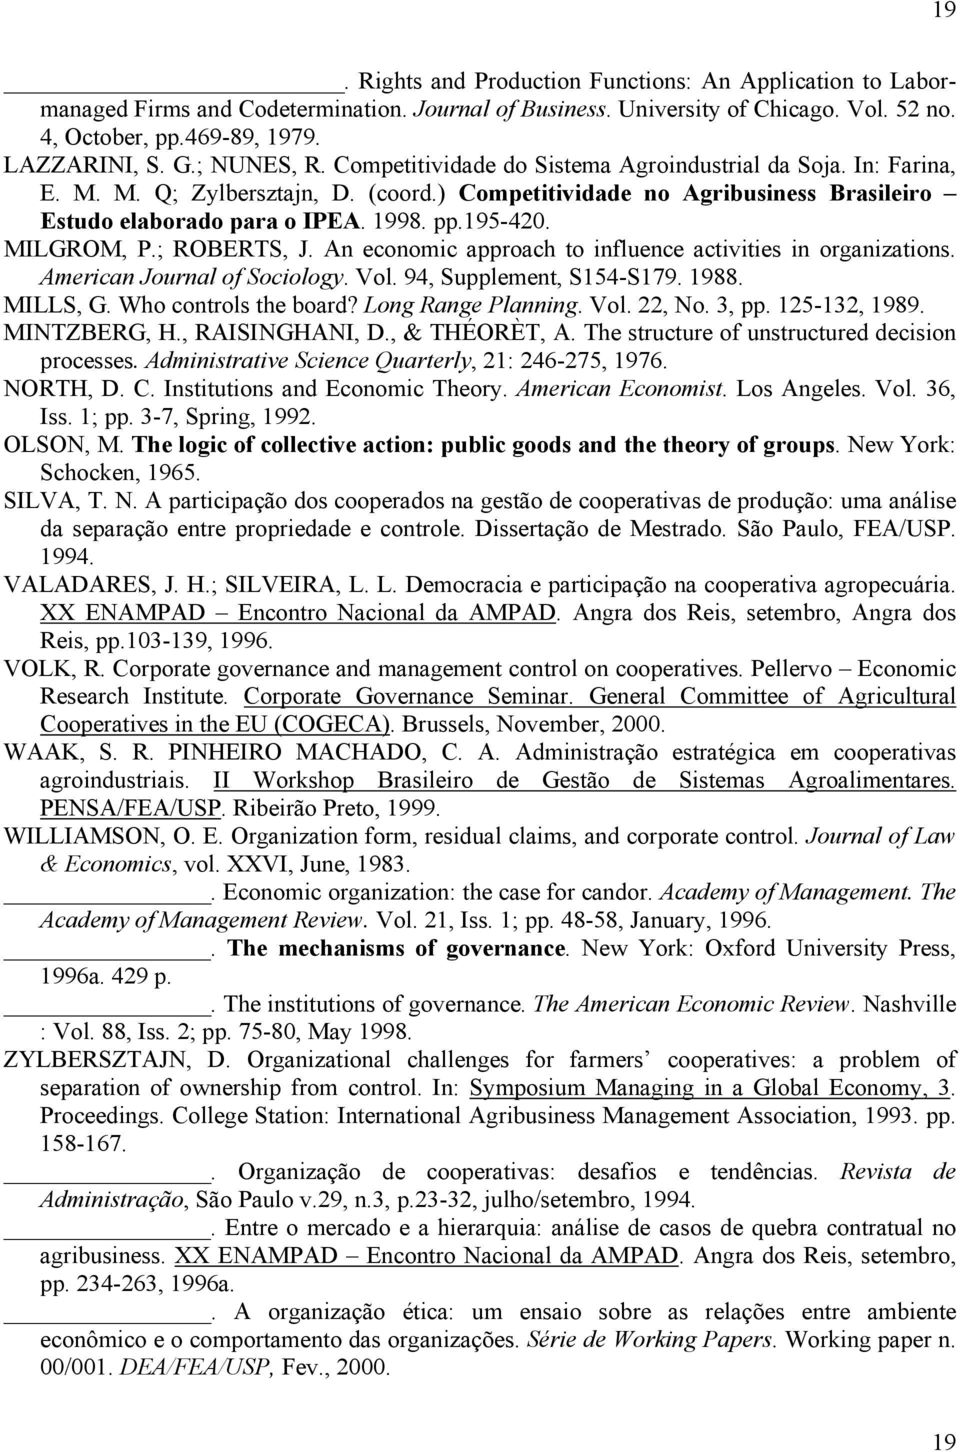 195-420. MILGROM, P.; ROBERTS, J. An economic approach to influence activities in organizations. American Journal of Sociology. Vol. 94, Supplement, S154-S179. 1988. MILLS, G. Who controls the board?